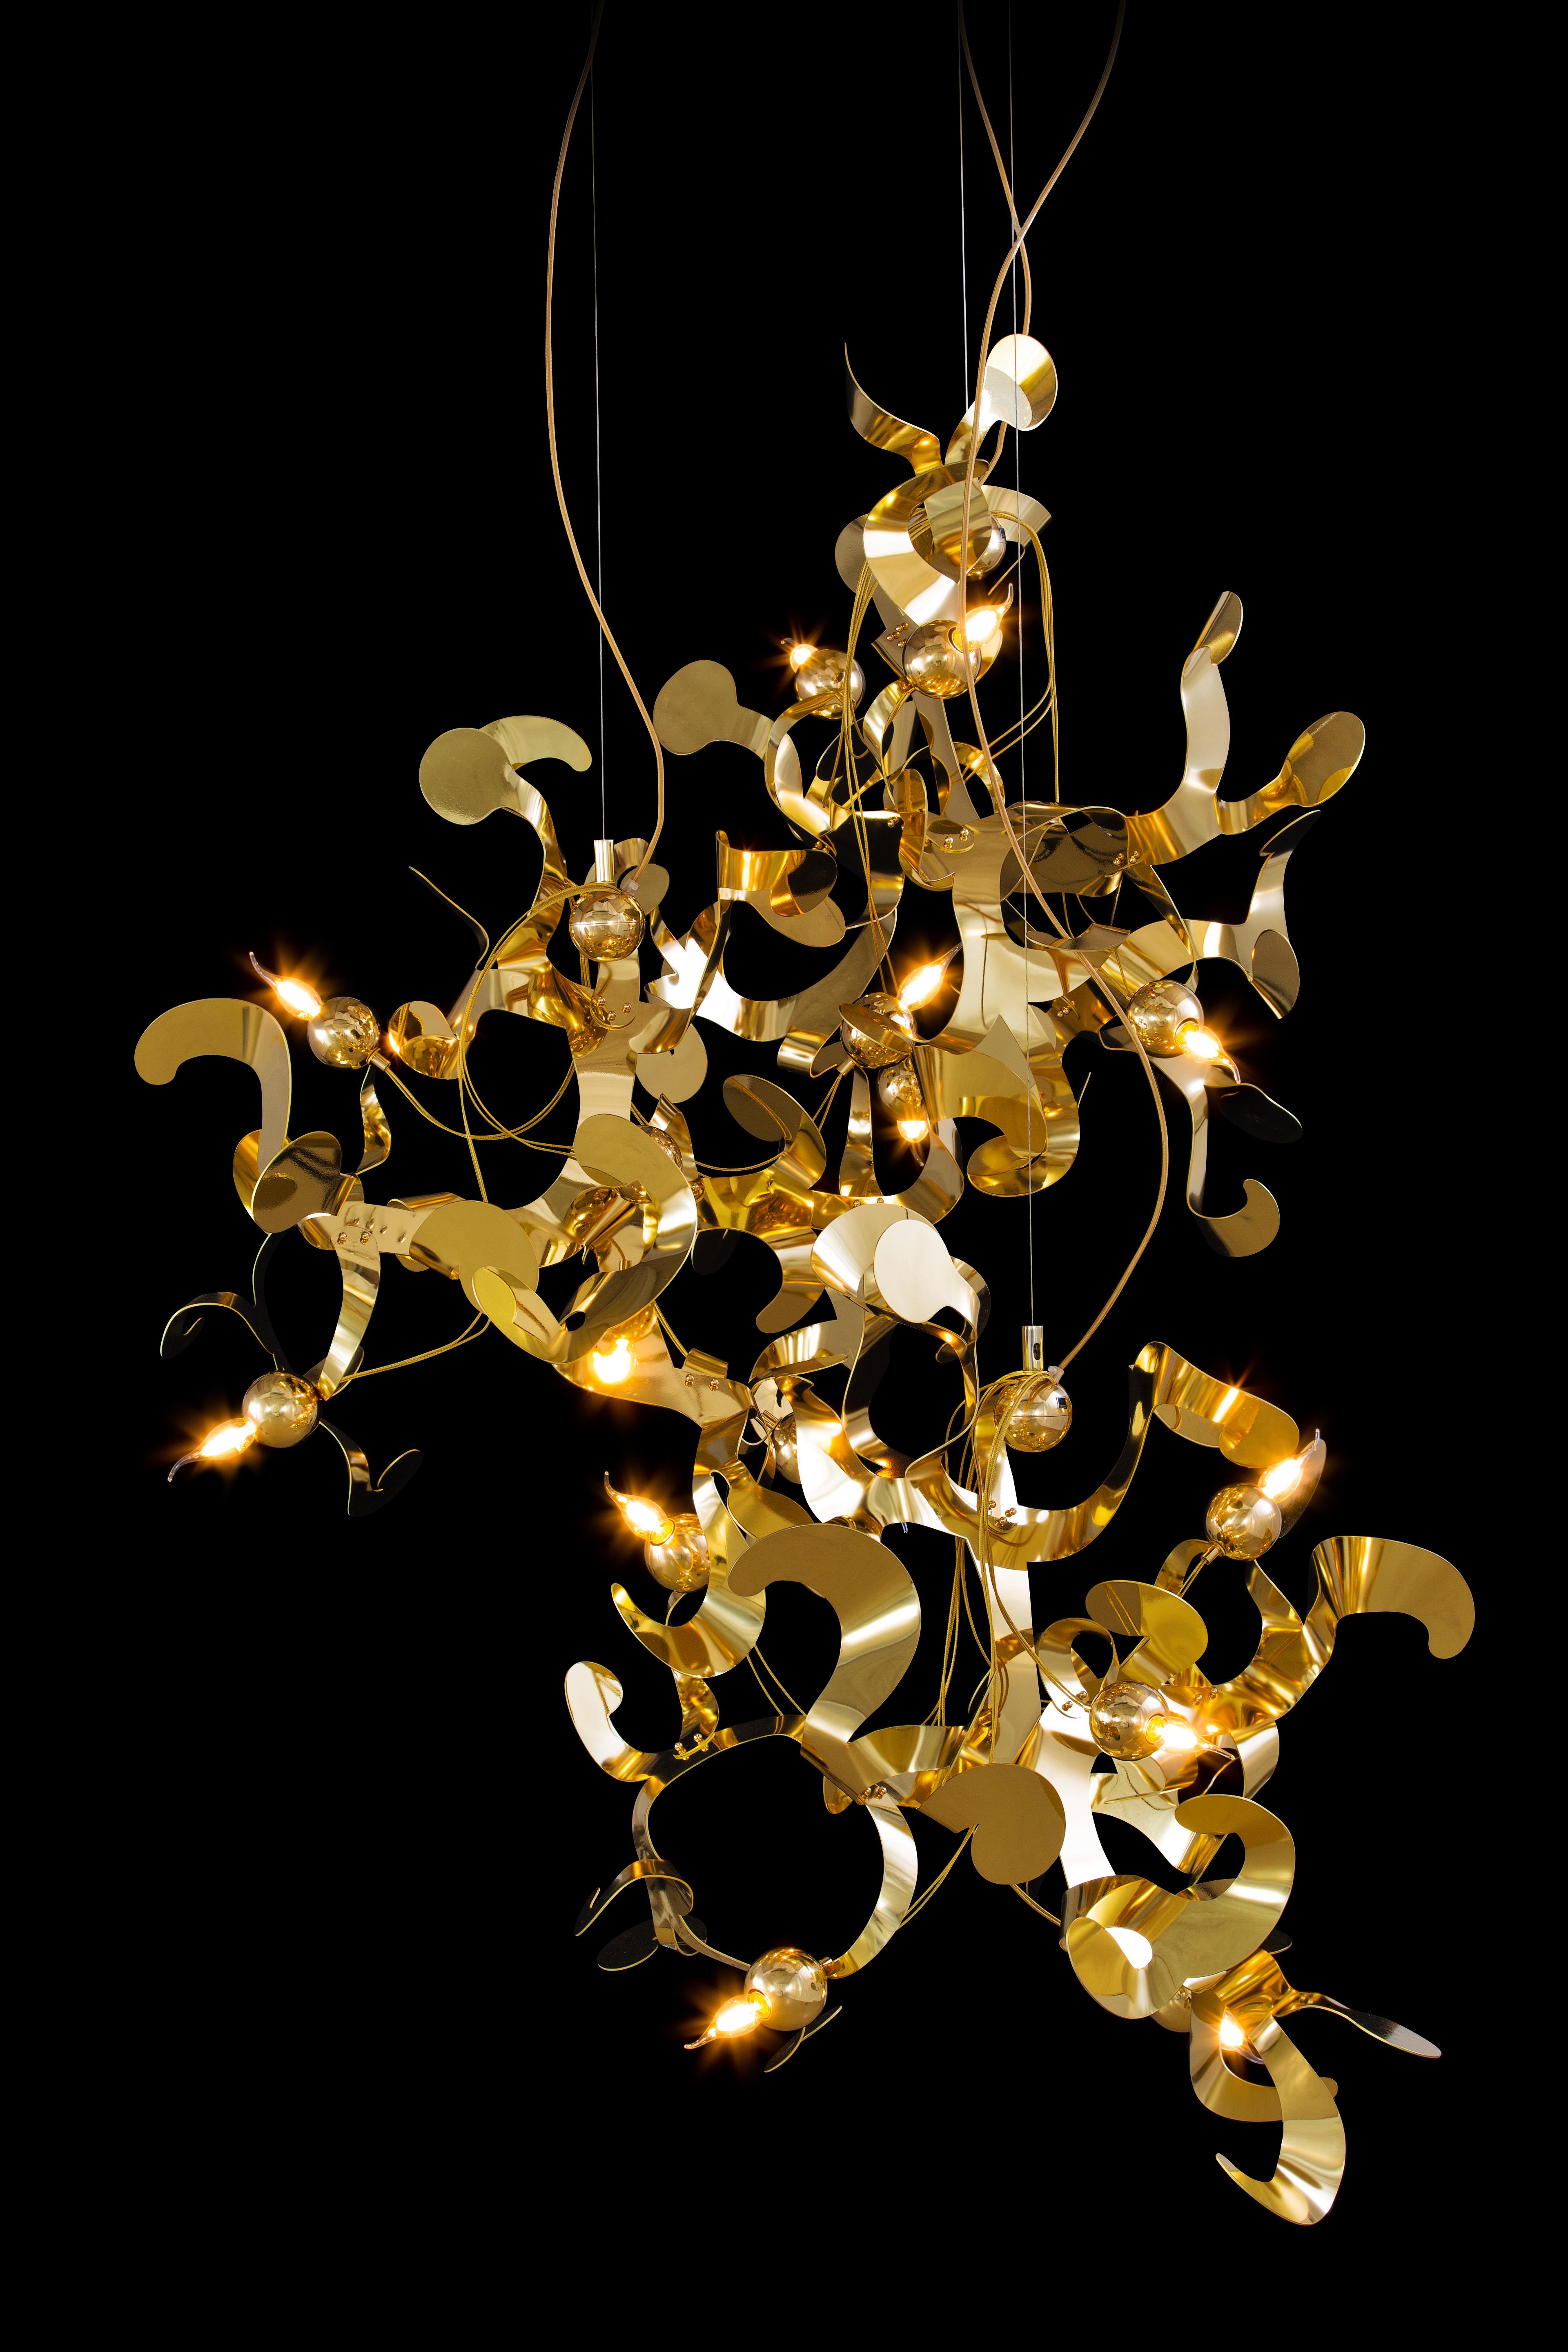 The Kelp modern pendant in a brass finish, designed by William Brand, is a free and playful organic lighting sculpture in the collection of Brand van Egmond. The seemingly randomness of the lighting sculpture, yet carefully arranged ornaments will